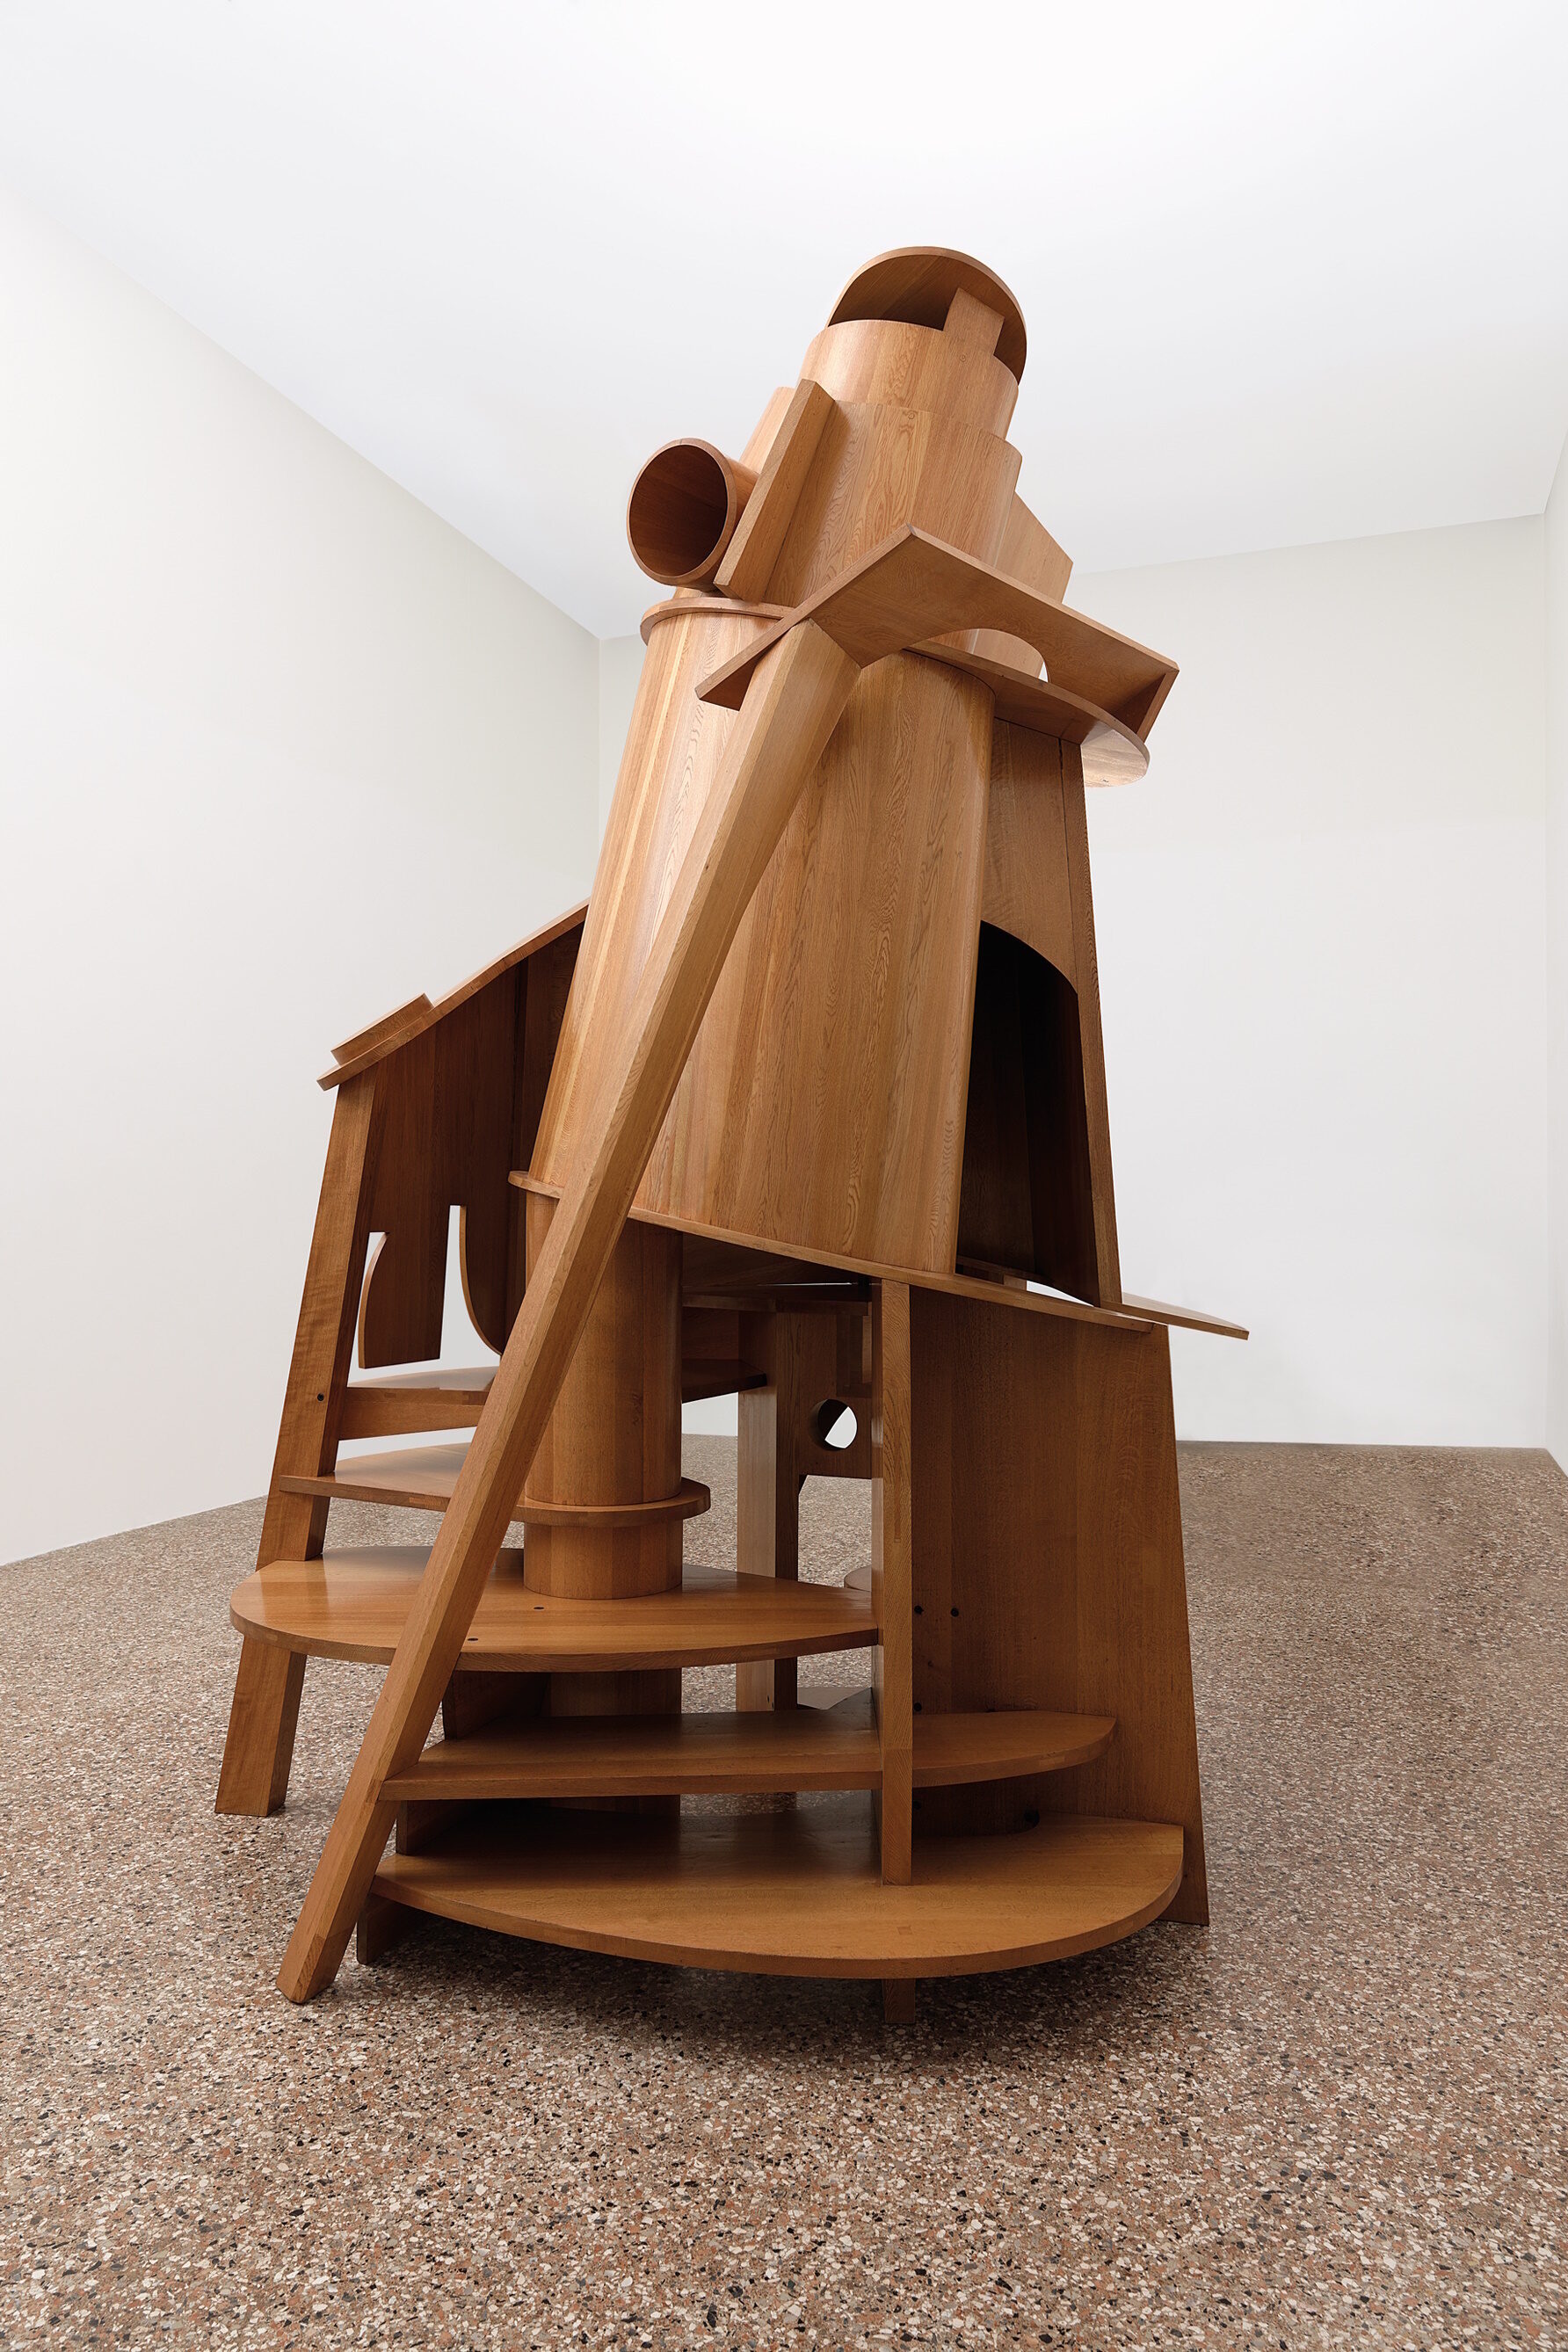 Anthony Caro, Sculptures, Ausstellung,Kunstausstellung, Skulpturenkunst, Wuppertal, Skulpturenpark Waldfrieden, Child's Tower Room, Mike Bruce